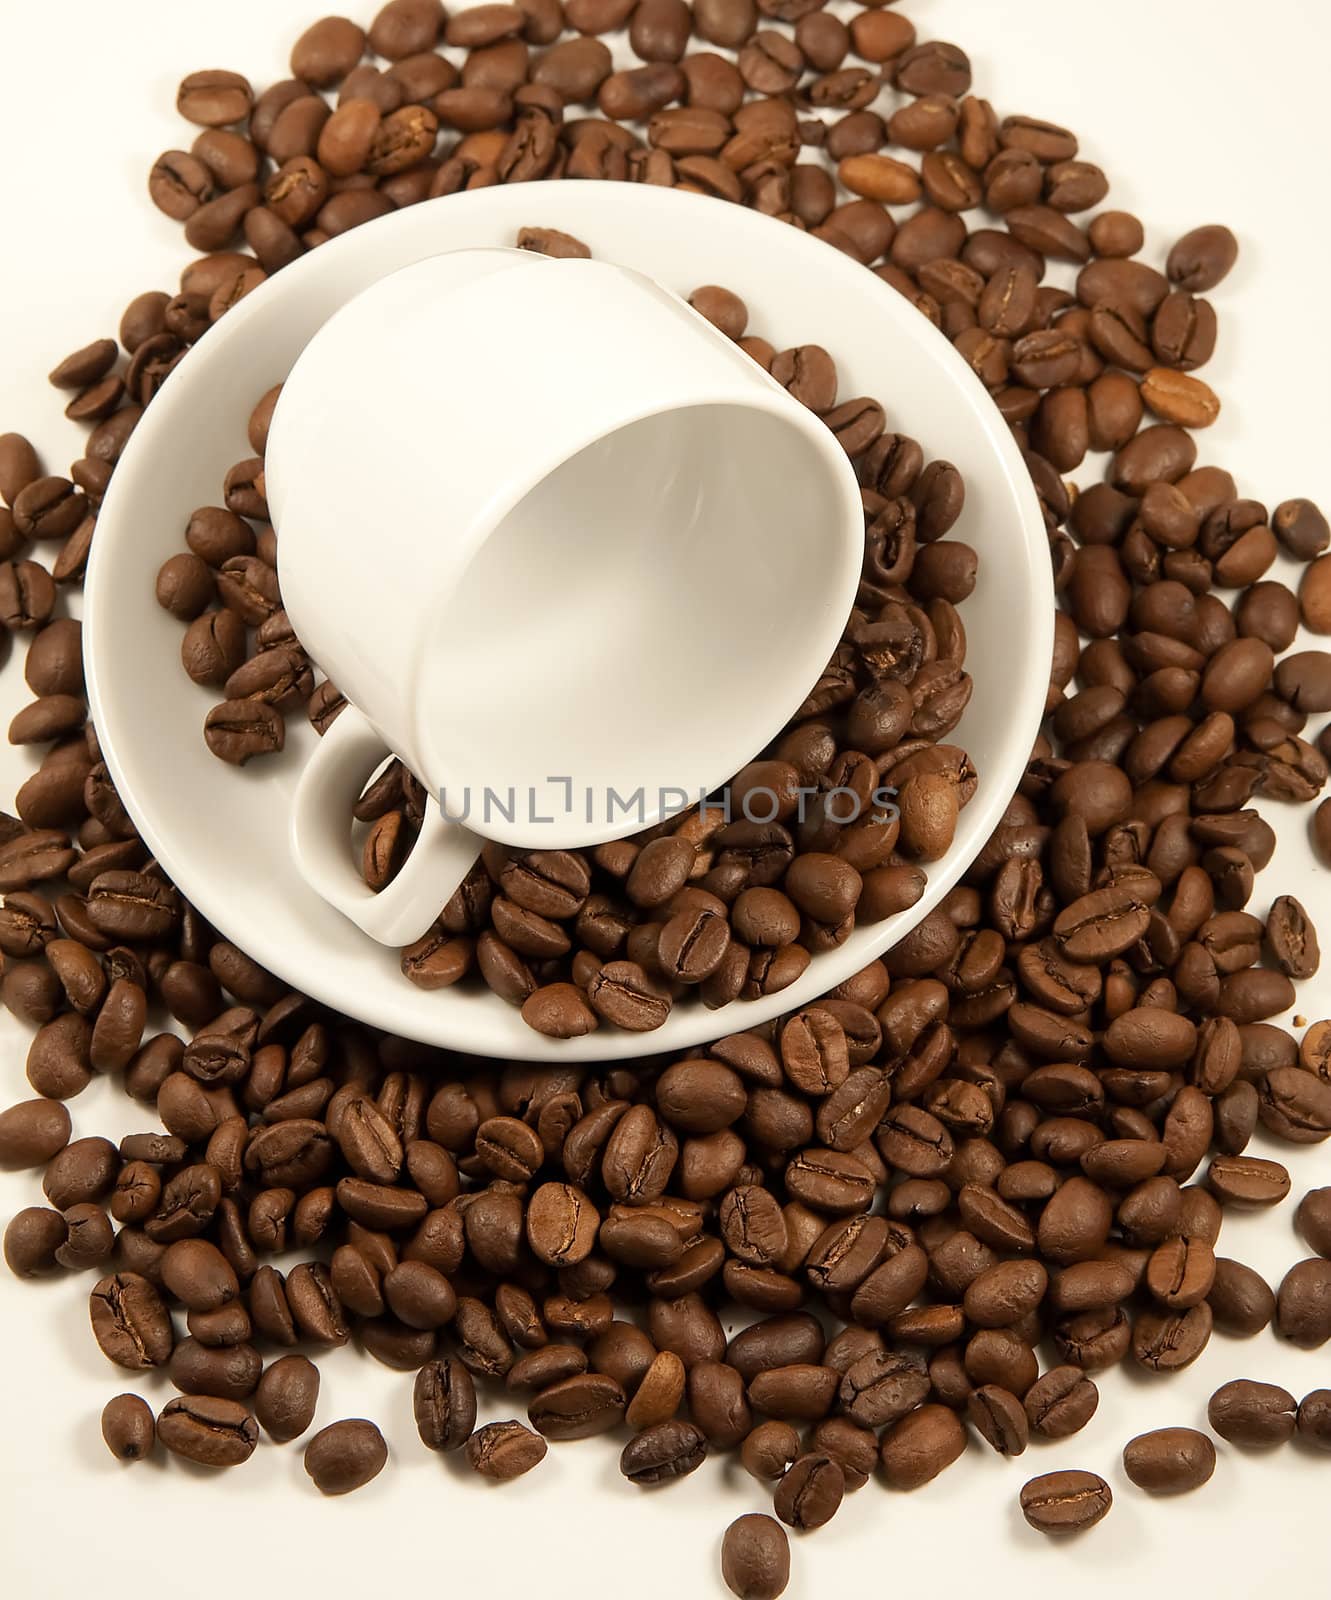 China coffee cup on roasted beans by serpl